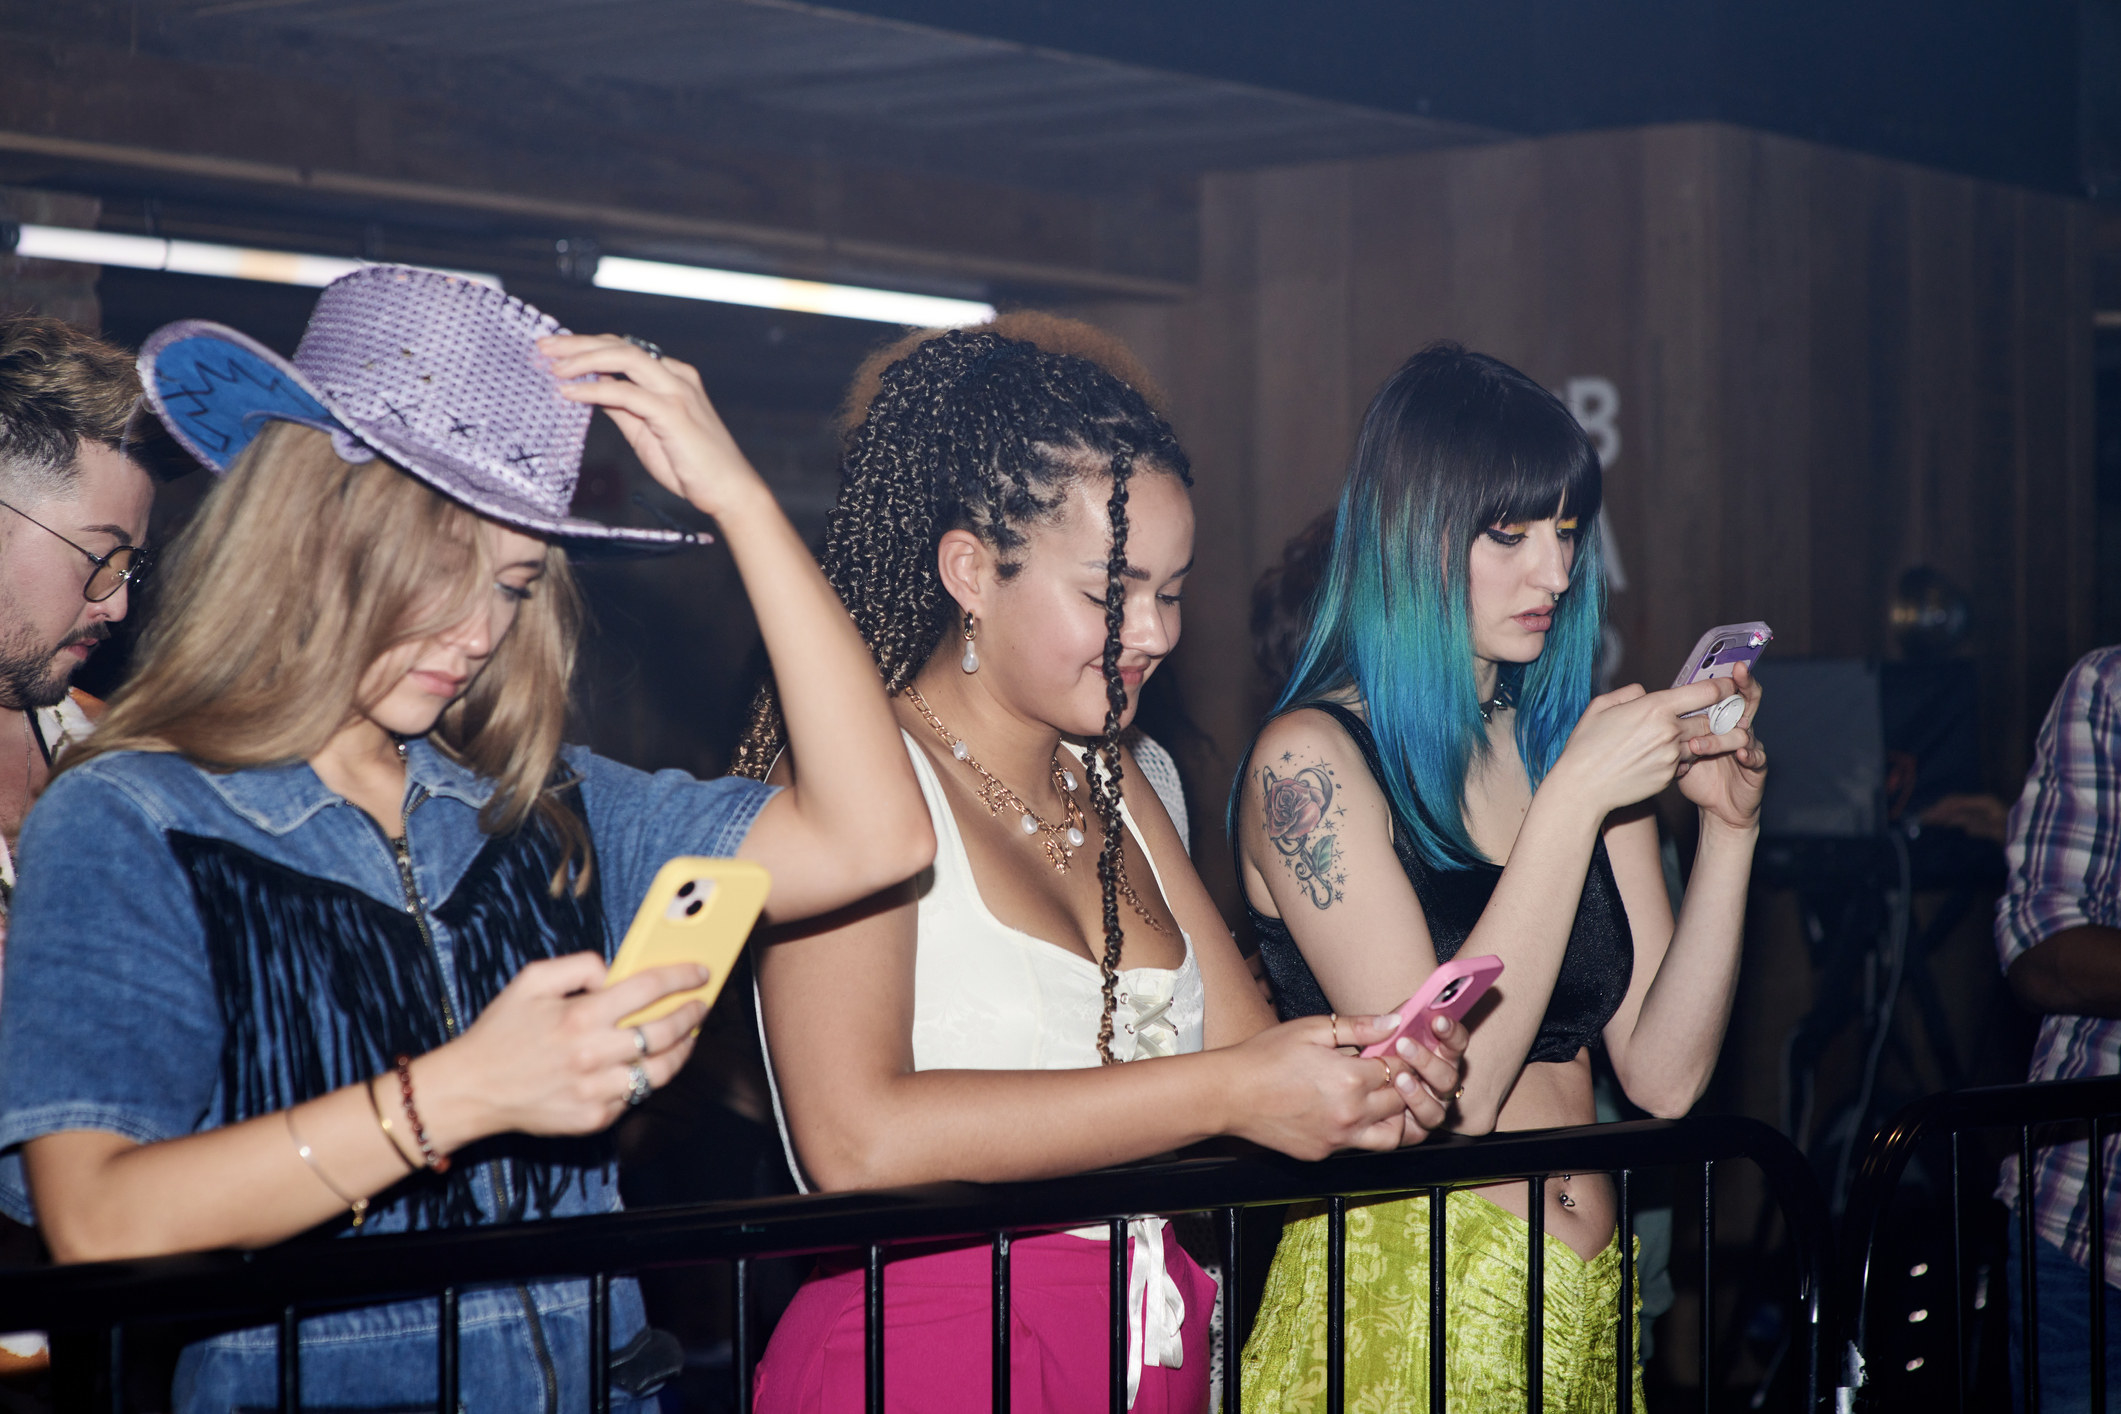 Concert-goers on their phones